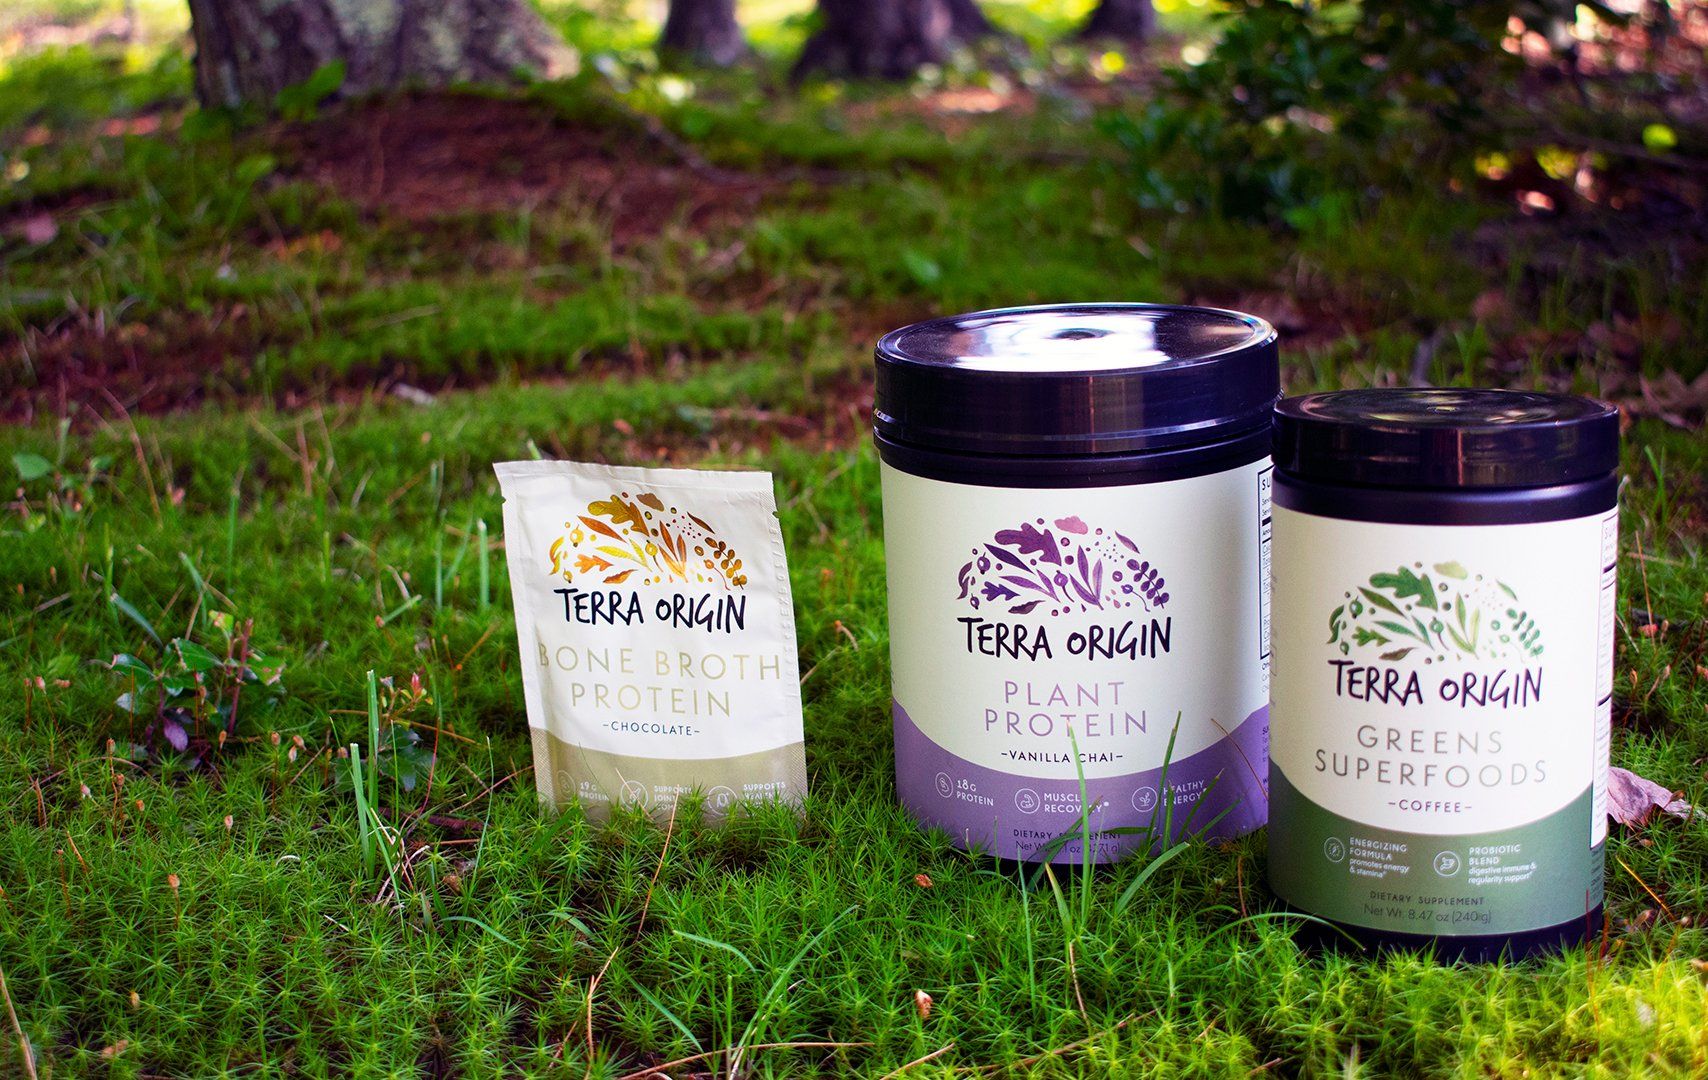 Terra Origin supplement product group on grassy natural background